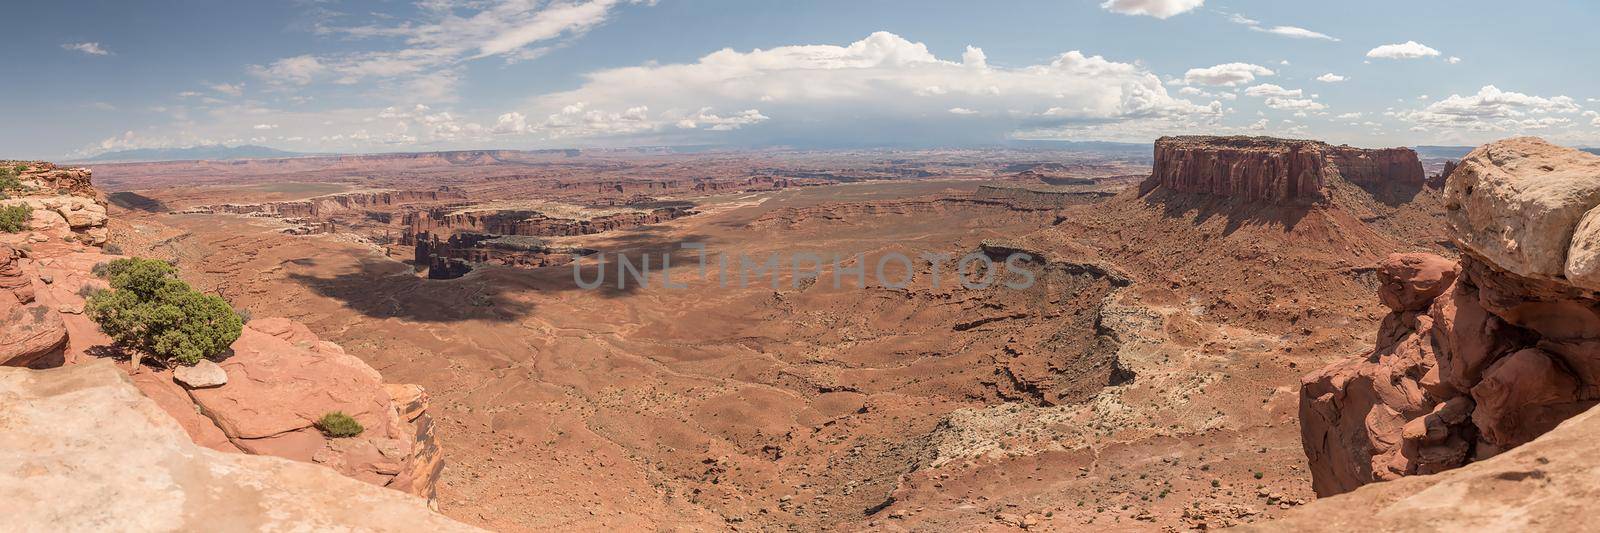 Panorama of Canyonlands landscape in Utah. by jyurinko